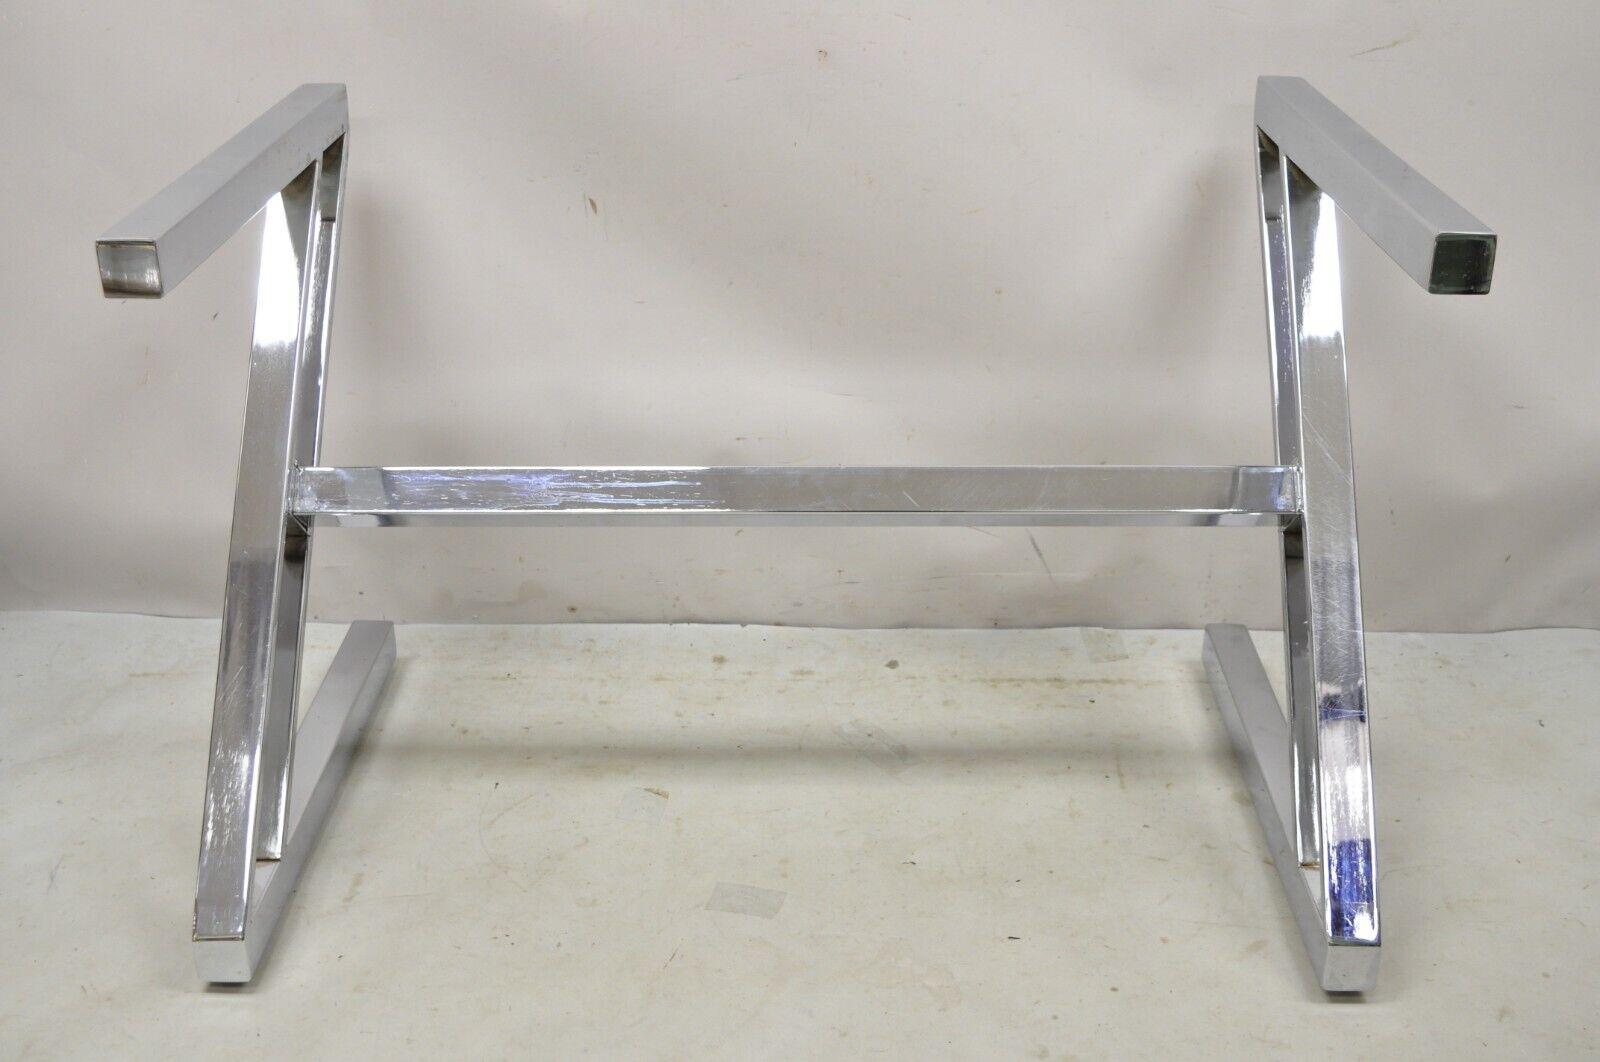 Mid-Century Modern Chrome Frame Z Shaped Metal Desk Dining Table Base.
Item features a unique Z-form, chrome finish, stretcher base, great to add a glass or stone top. circa Late 20th century. Measurements: 28